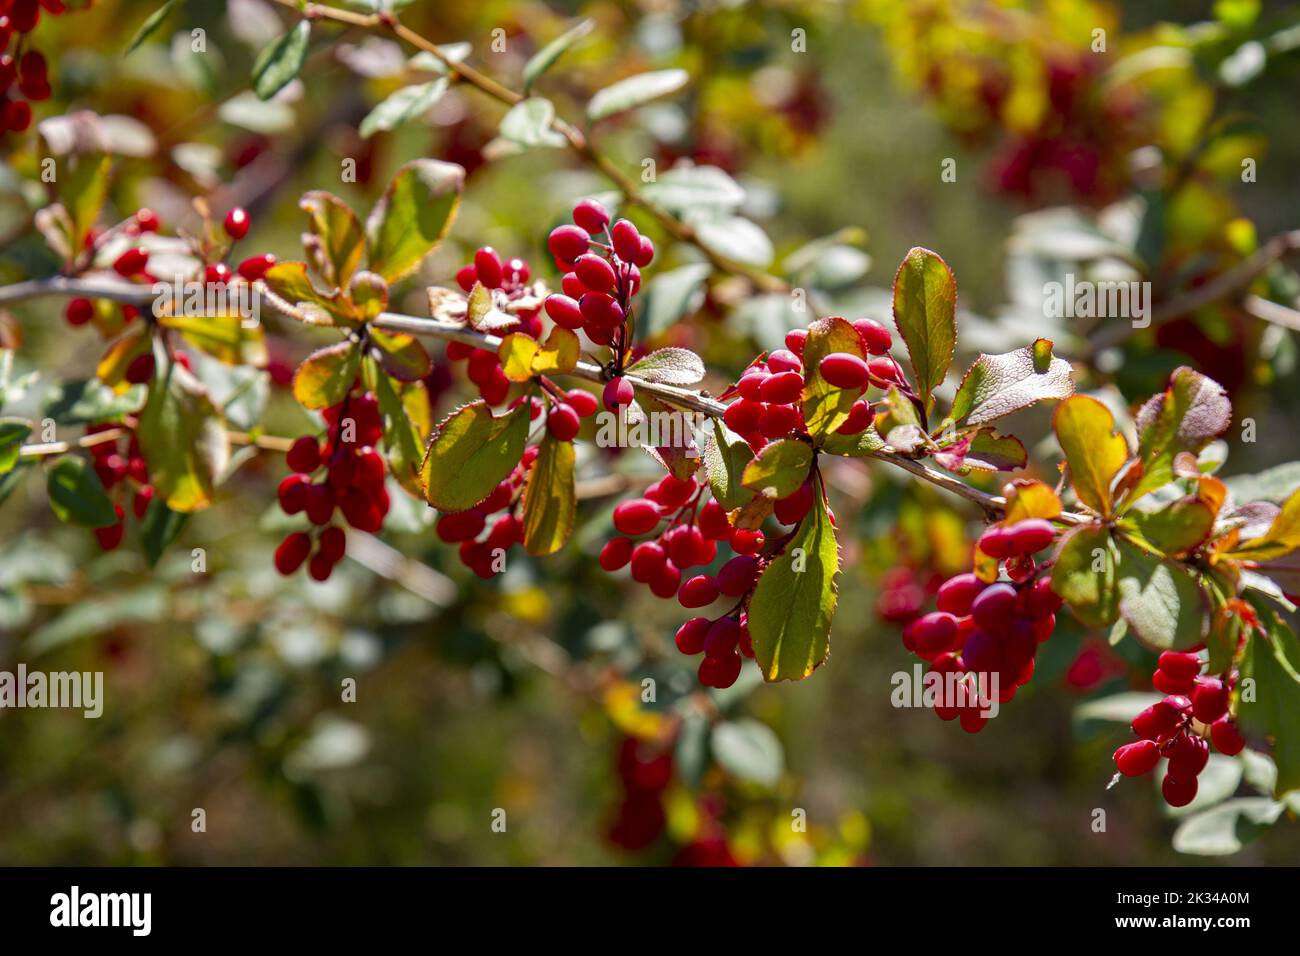 Ripe barberry berries in the rays of the daytime sun. Stock Photo